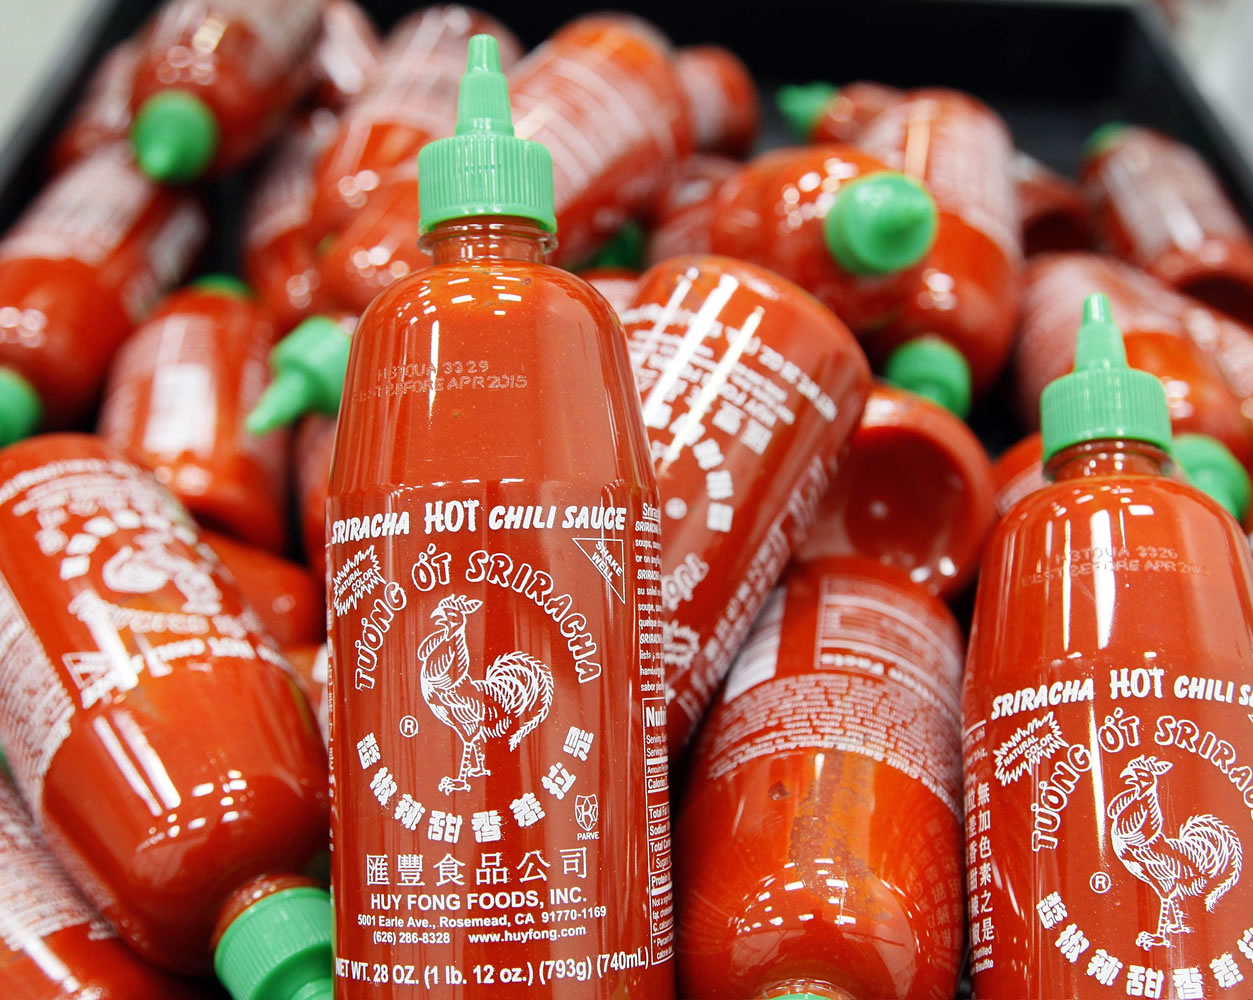 Associated Press files
Sriracha chili sauce bottles are produced at the Huy Fong Foods factory in Irwindale, Calif. The product has steadily gained in popularity despite the company not advertising the product.